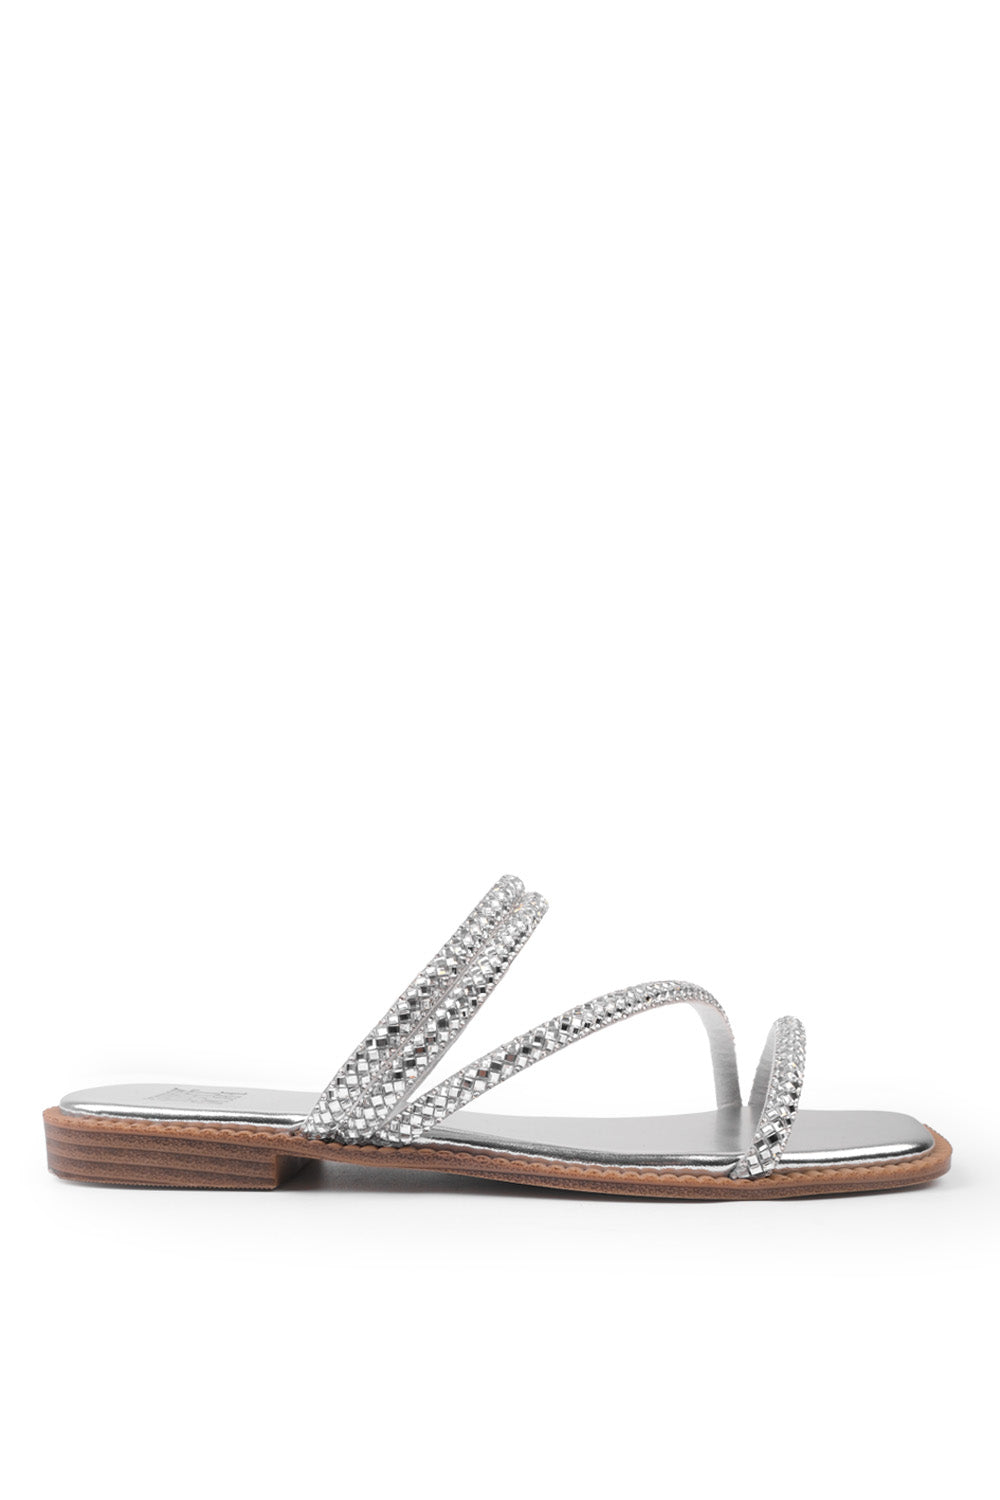 DREAM EXTRA WIDE STRAPPY FLAT SLIDER SANDALS WITH DIAMANTE DETAIL IN SILVER FAUX LEATHER